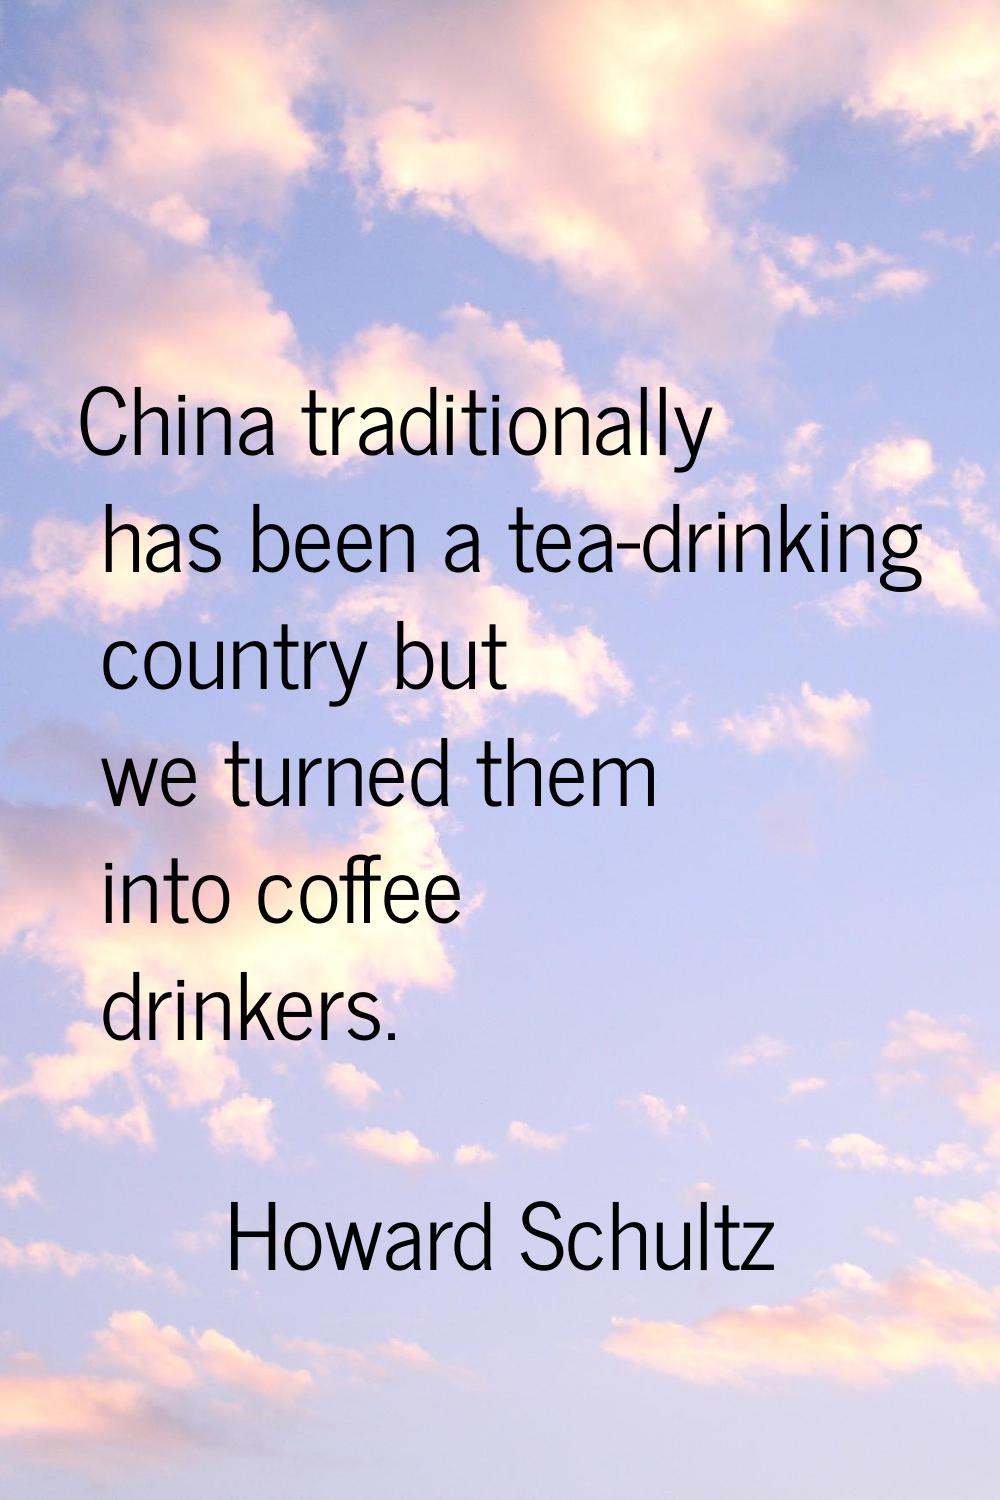 China traditionally has been a tea-drinking country but we turned them into coffee drinkers.